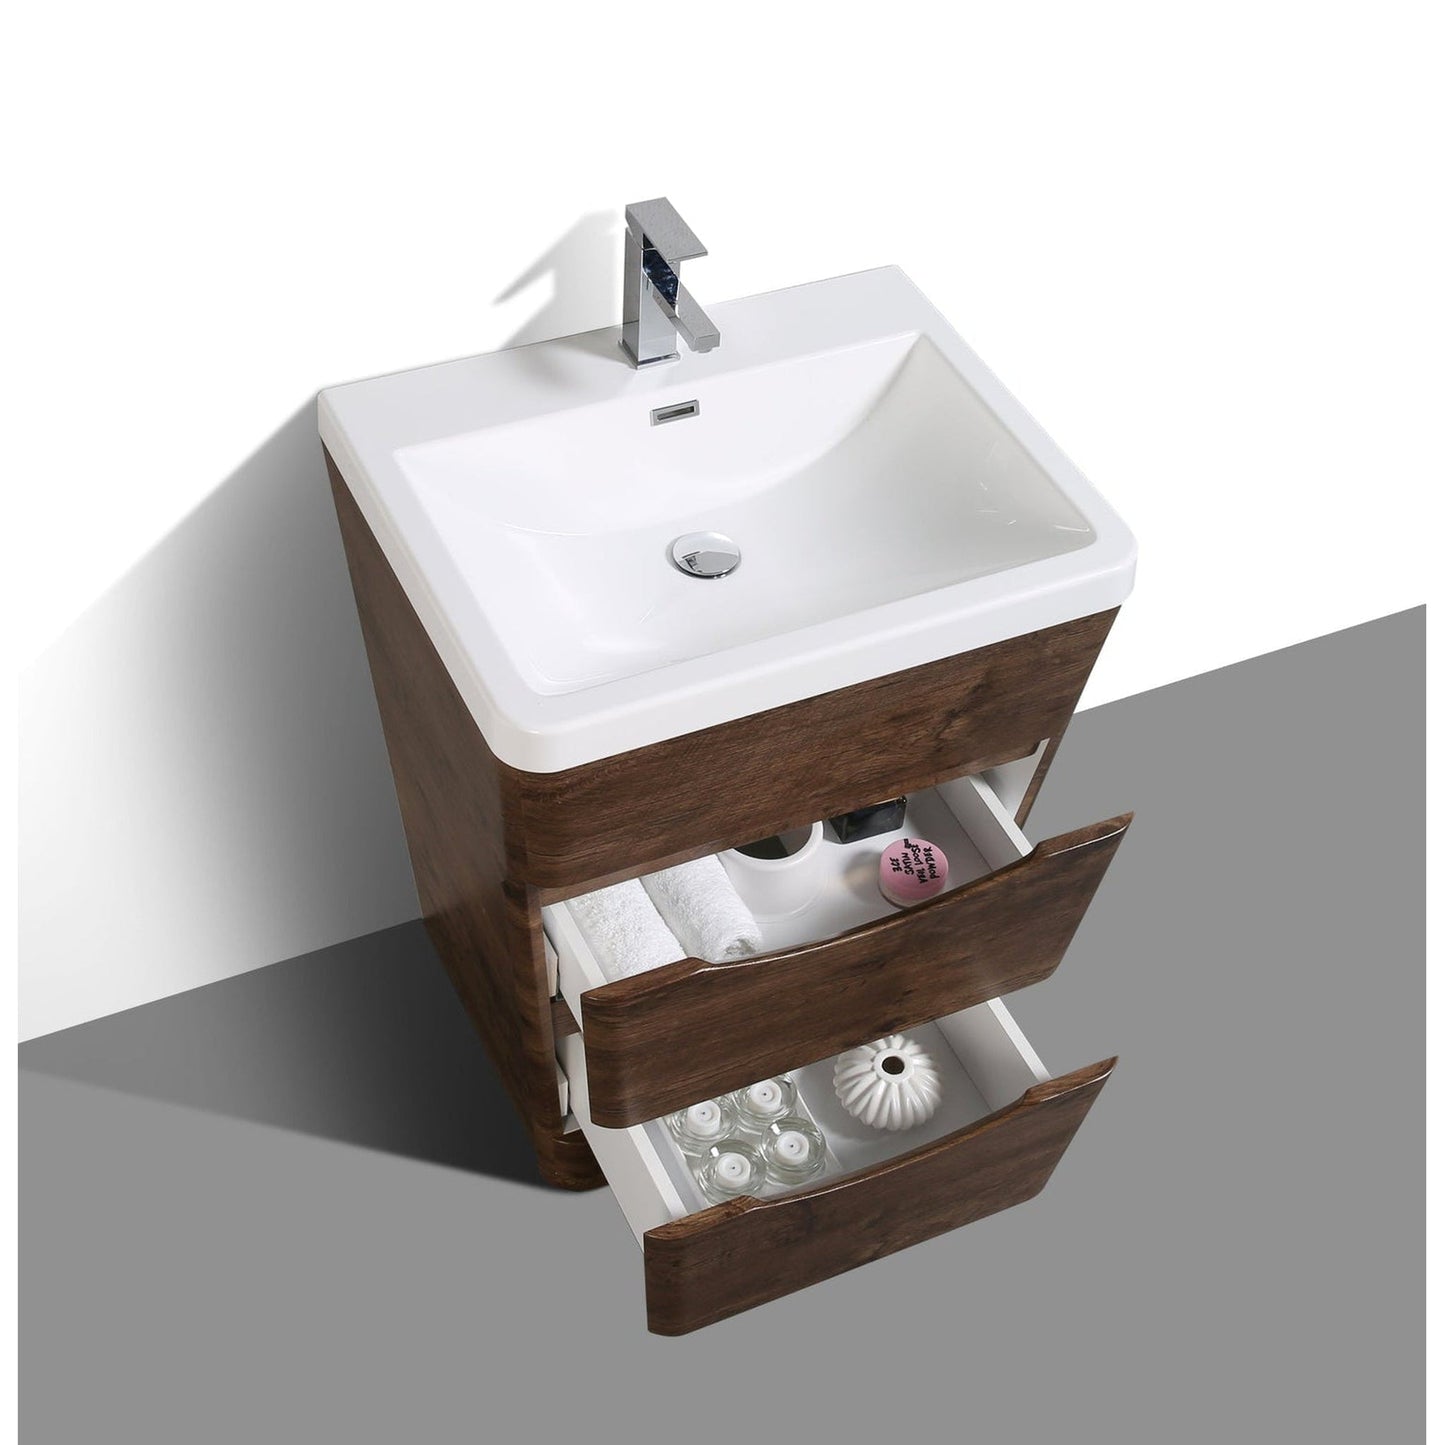 Eviva Victoria 25" x 34" Rosewood Freestanding Bathroom Vanity With White Integrated Acrylic Sink